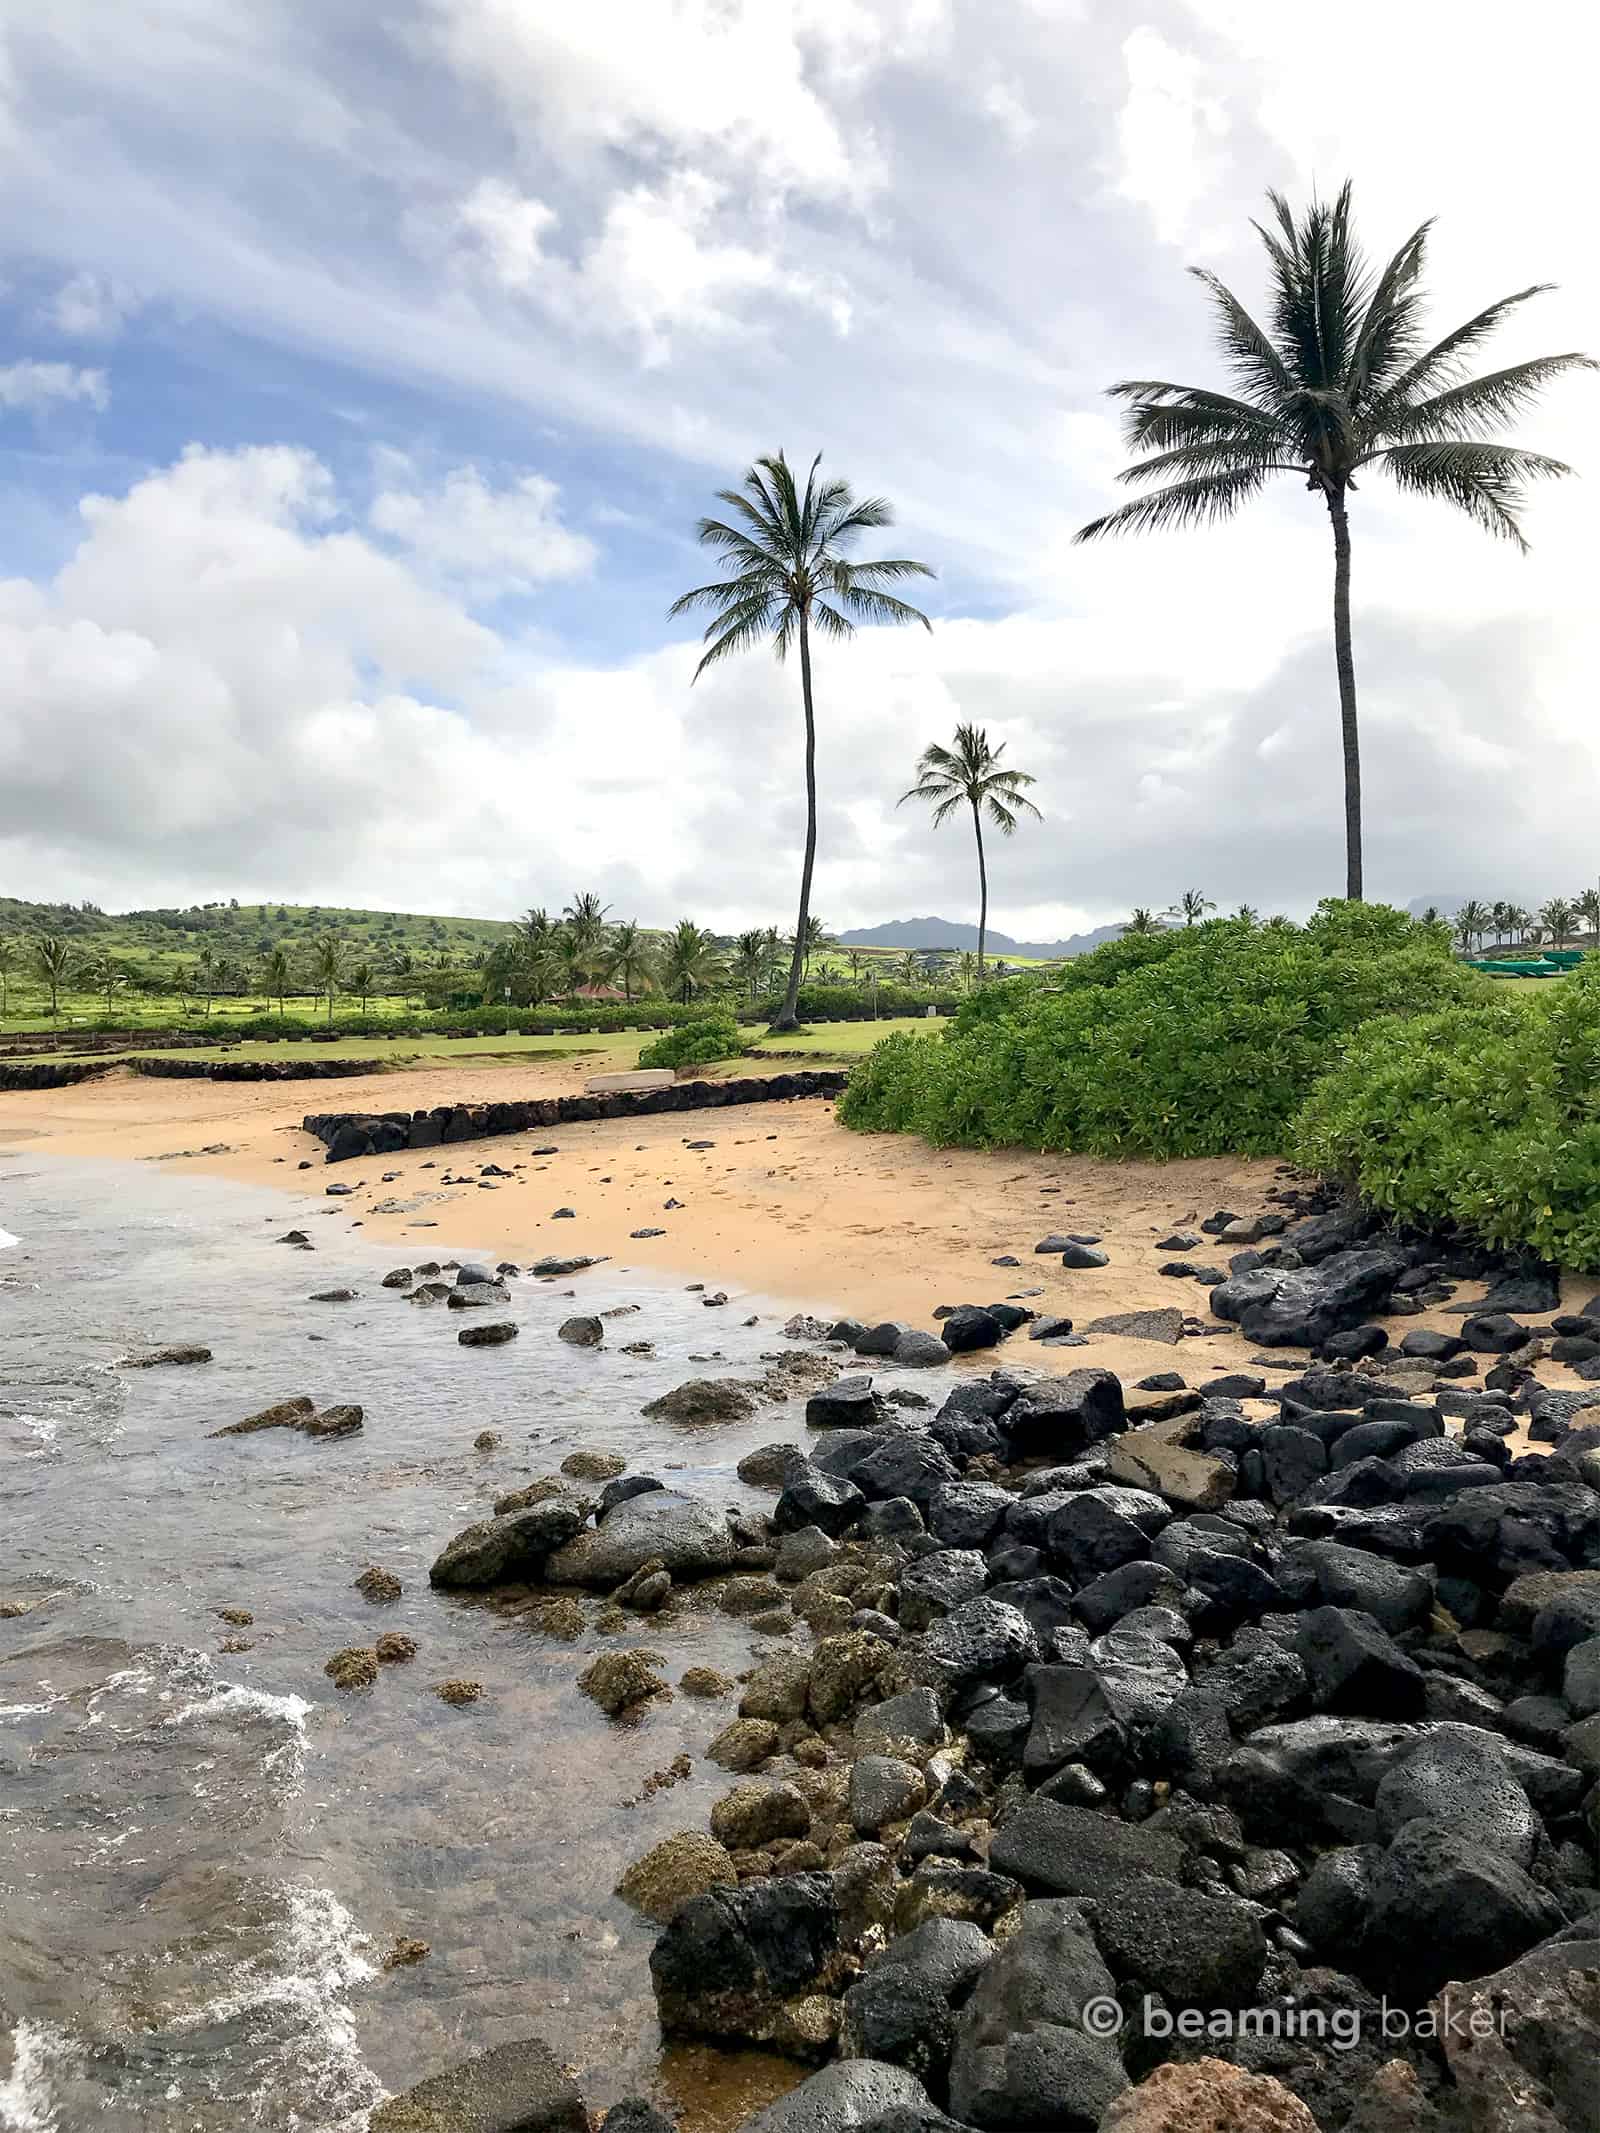 Seven of the most amazingly fun and memorable activities to do when staying in the South Shore of Kauai, Hawaii. #Travel #TravelTips #Hawaii #BucketLists | Post on BeamingBaker.com